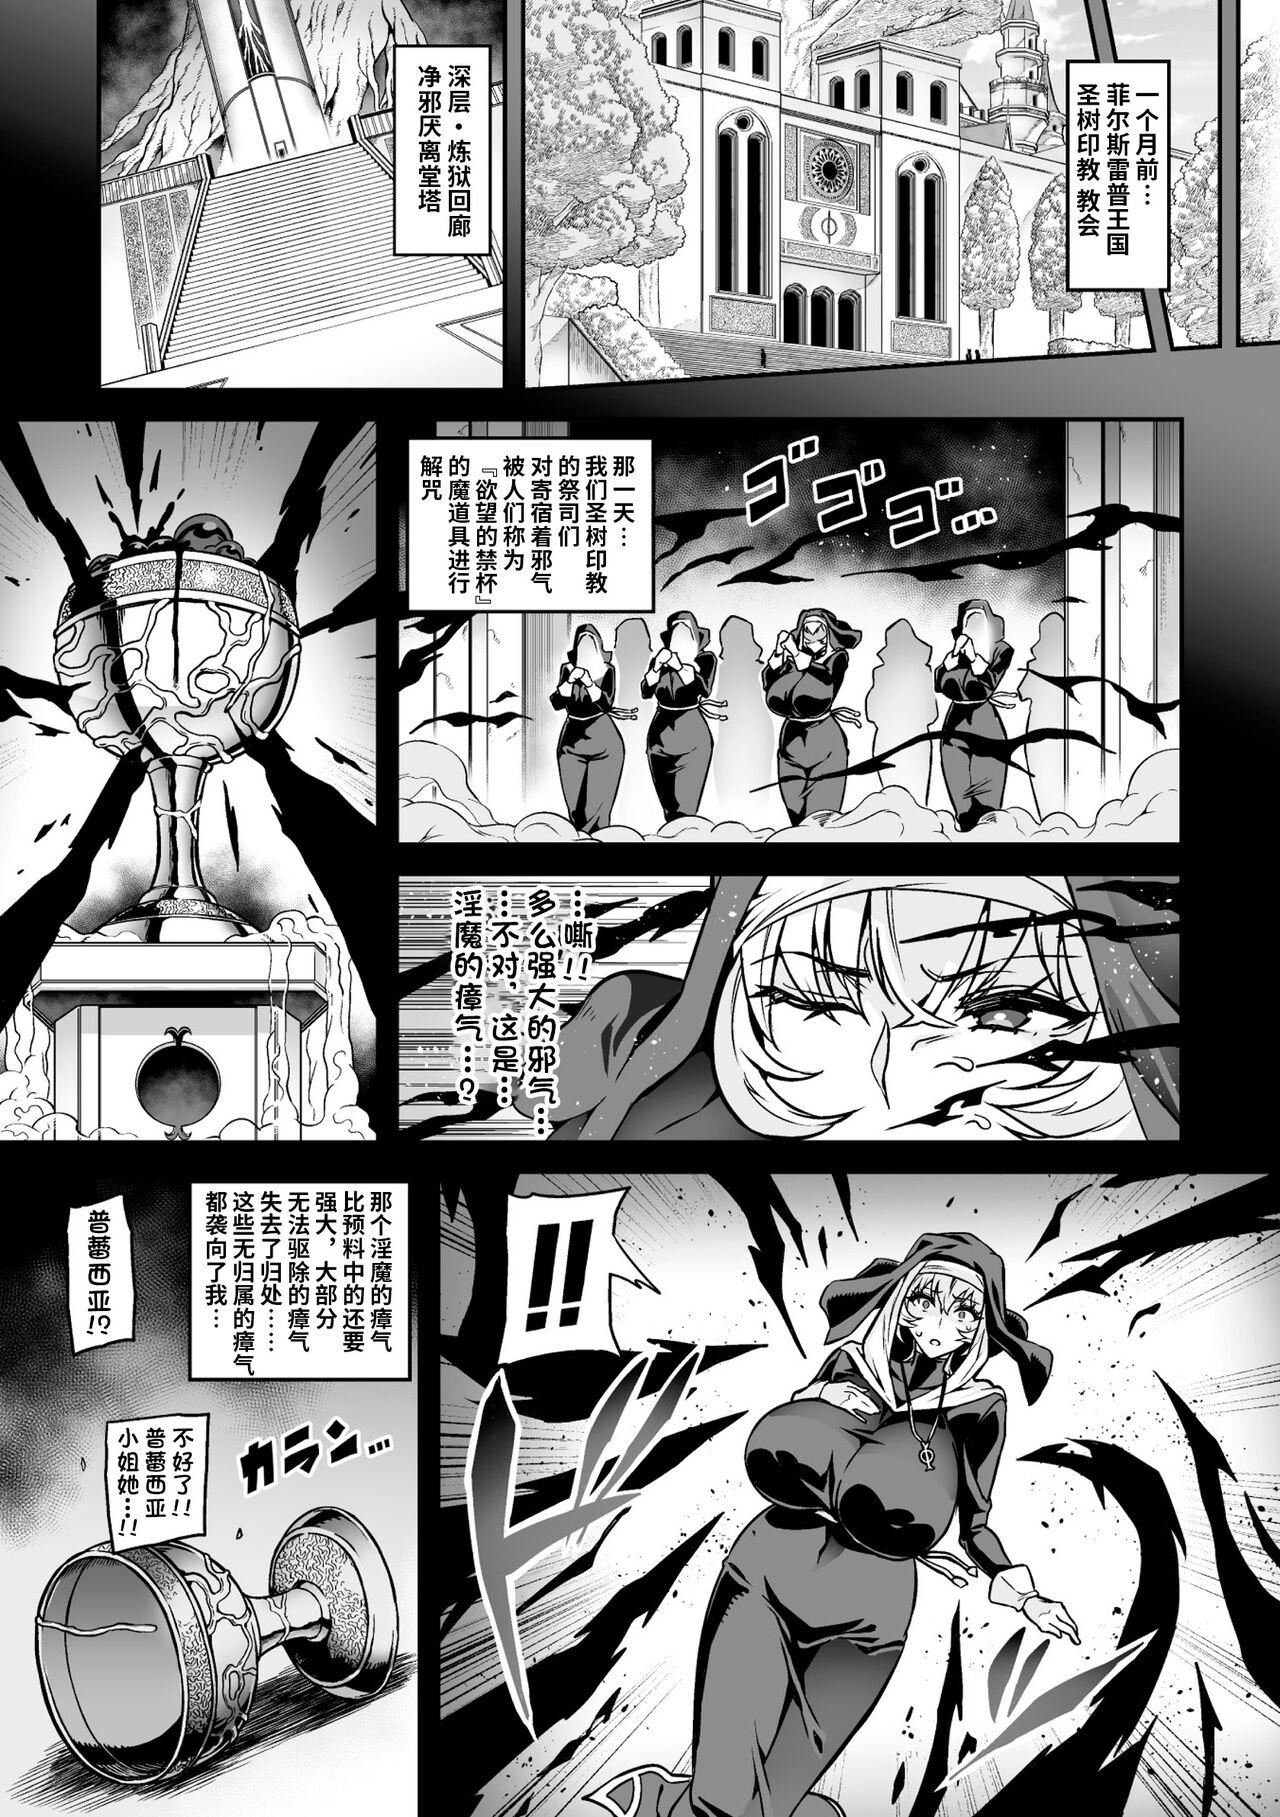 Face Sitting Youkoso! Inma Shoukan Arcadia Ego Ch. 2 Scene - Page 6